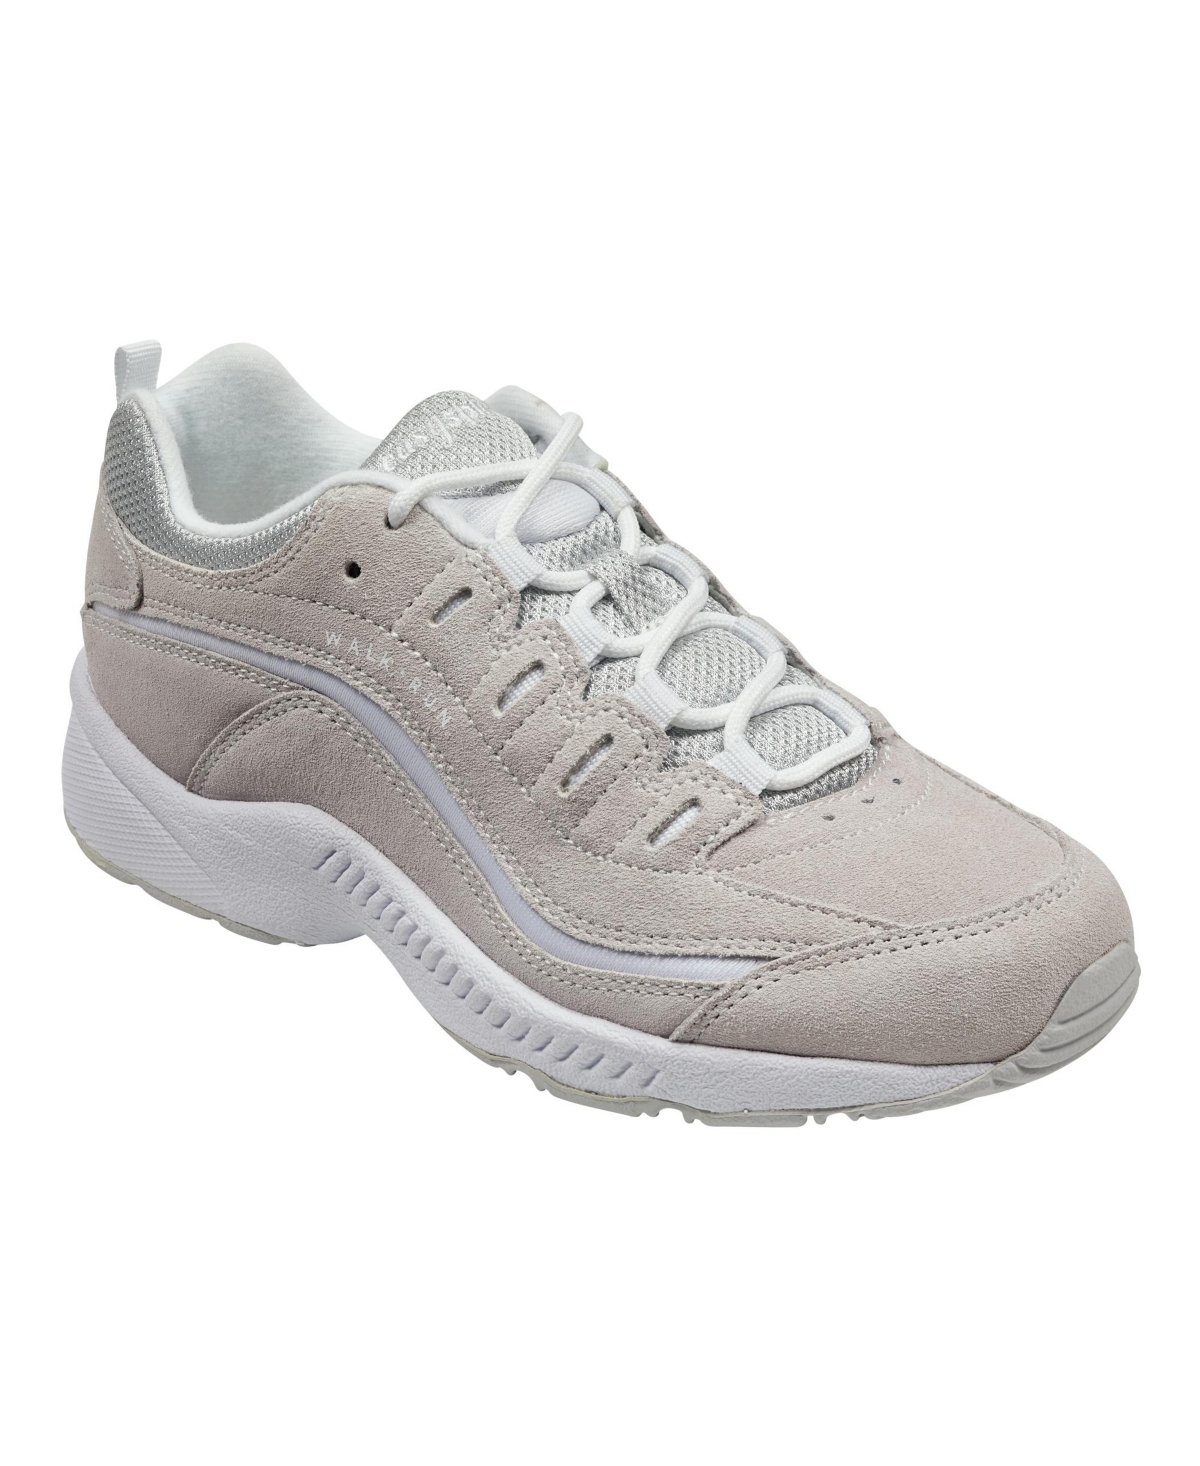 UPC 191656311722 product image for Easy Spirit Women's Romy Round Toe Casual Lace Up Walking Shoes Women's Shoes | upcitemdb.com